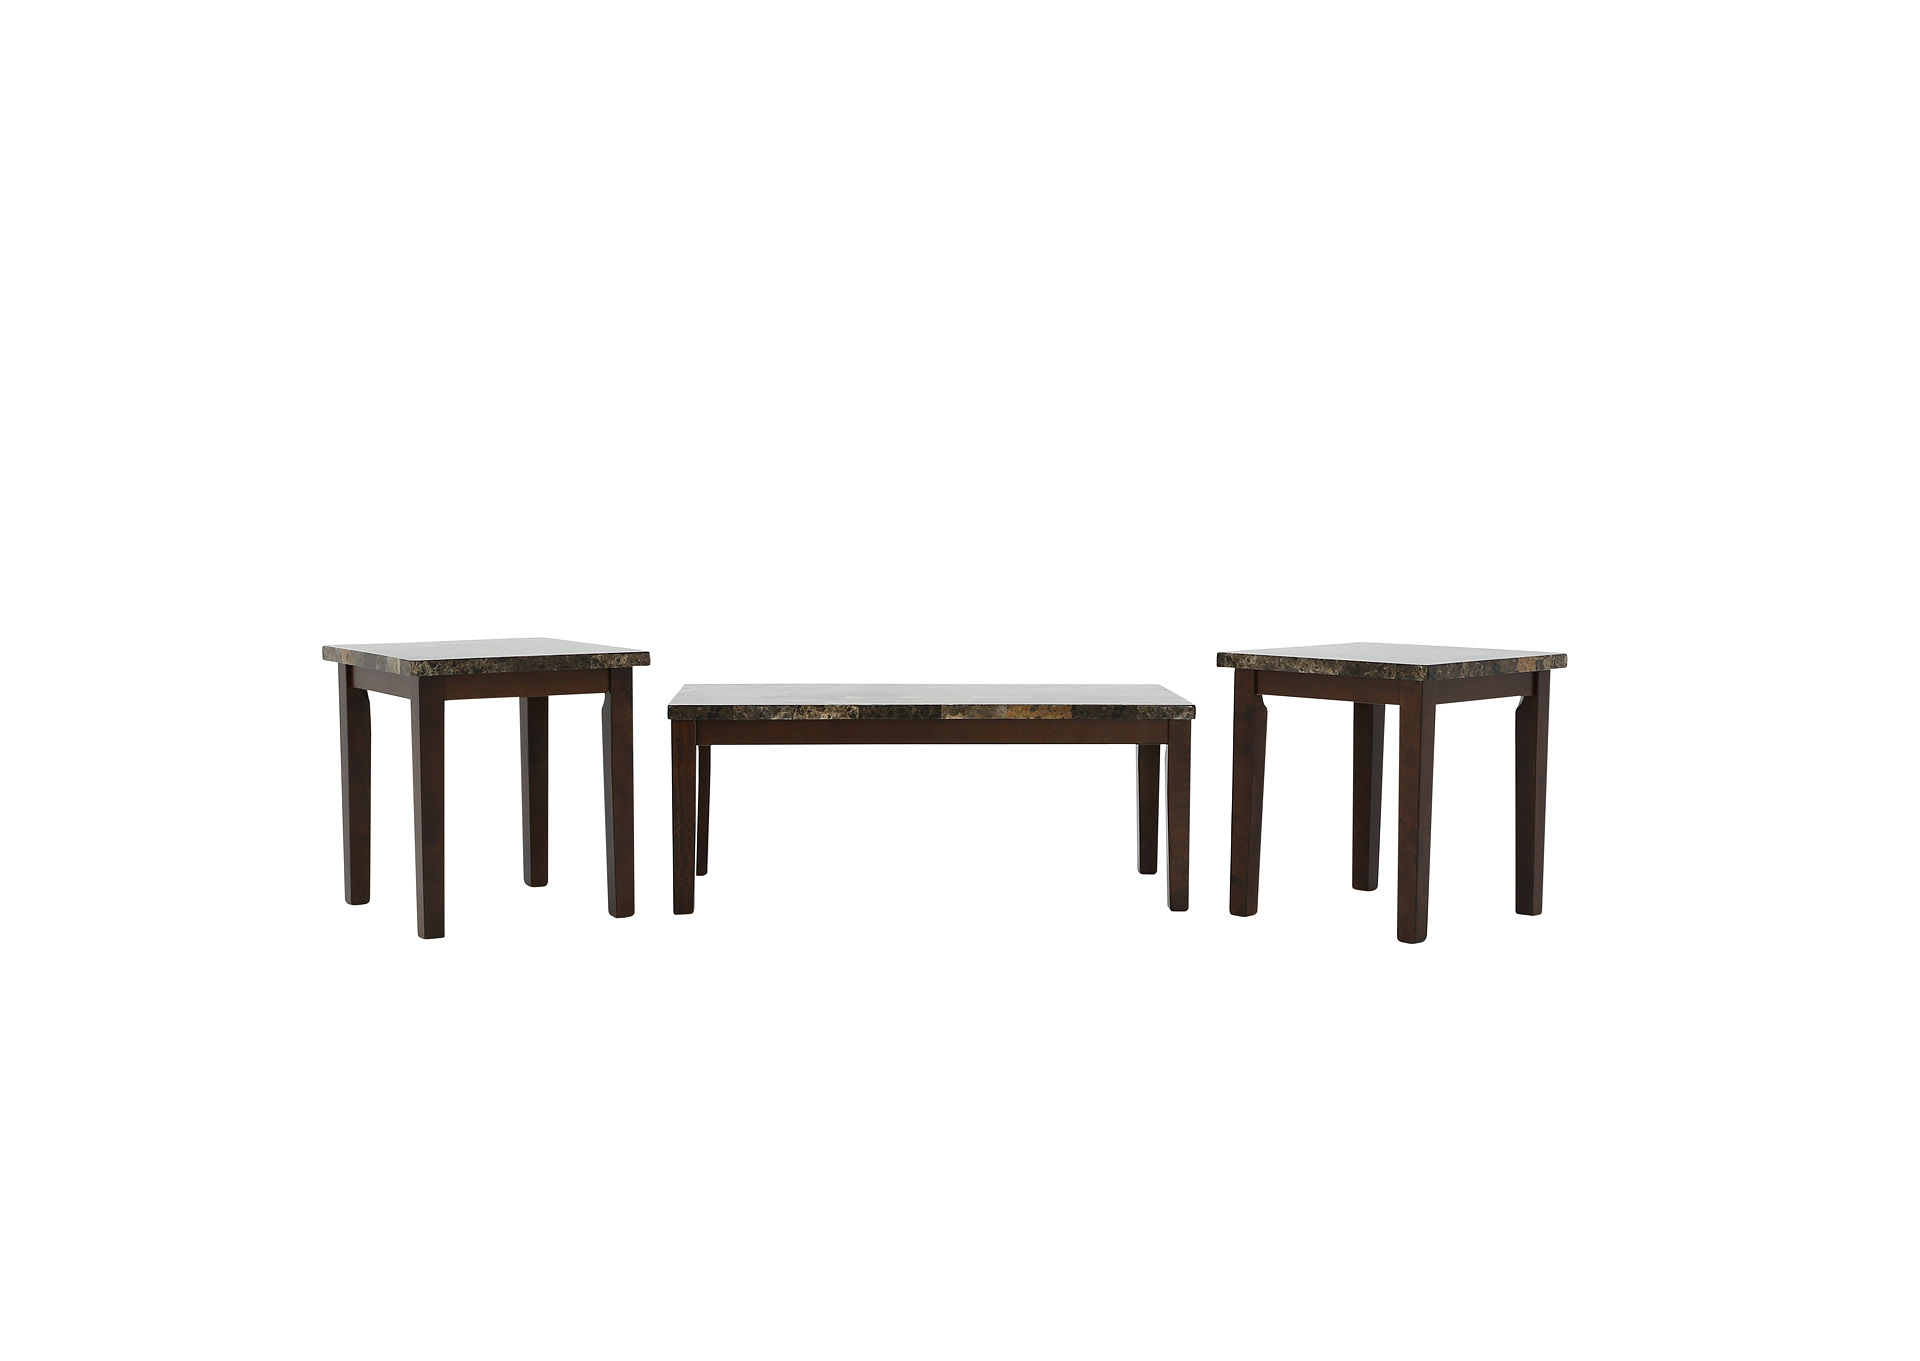 THEO 3 PIECE OCCASIONAL TABLE SET,ASHLEY FURNITURE INC.